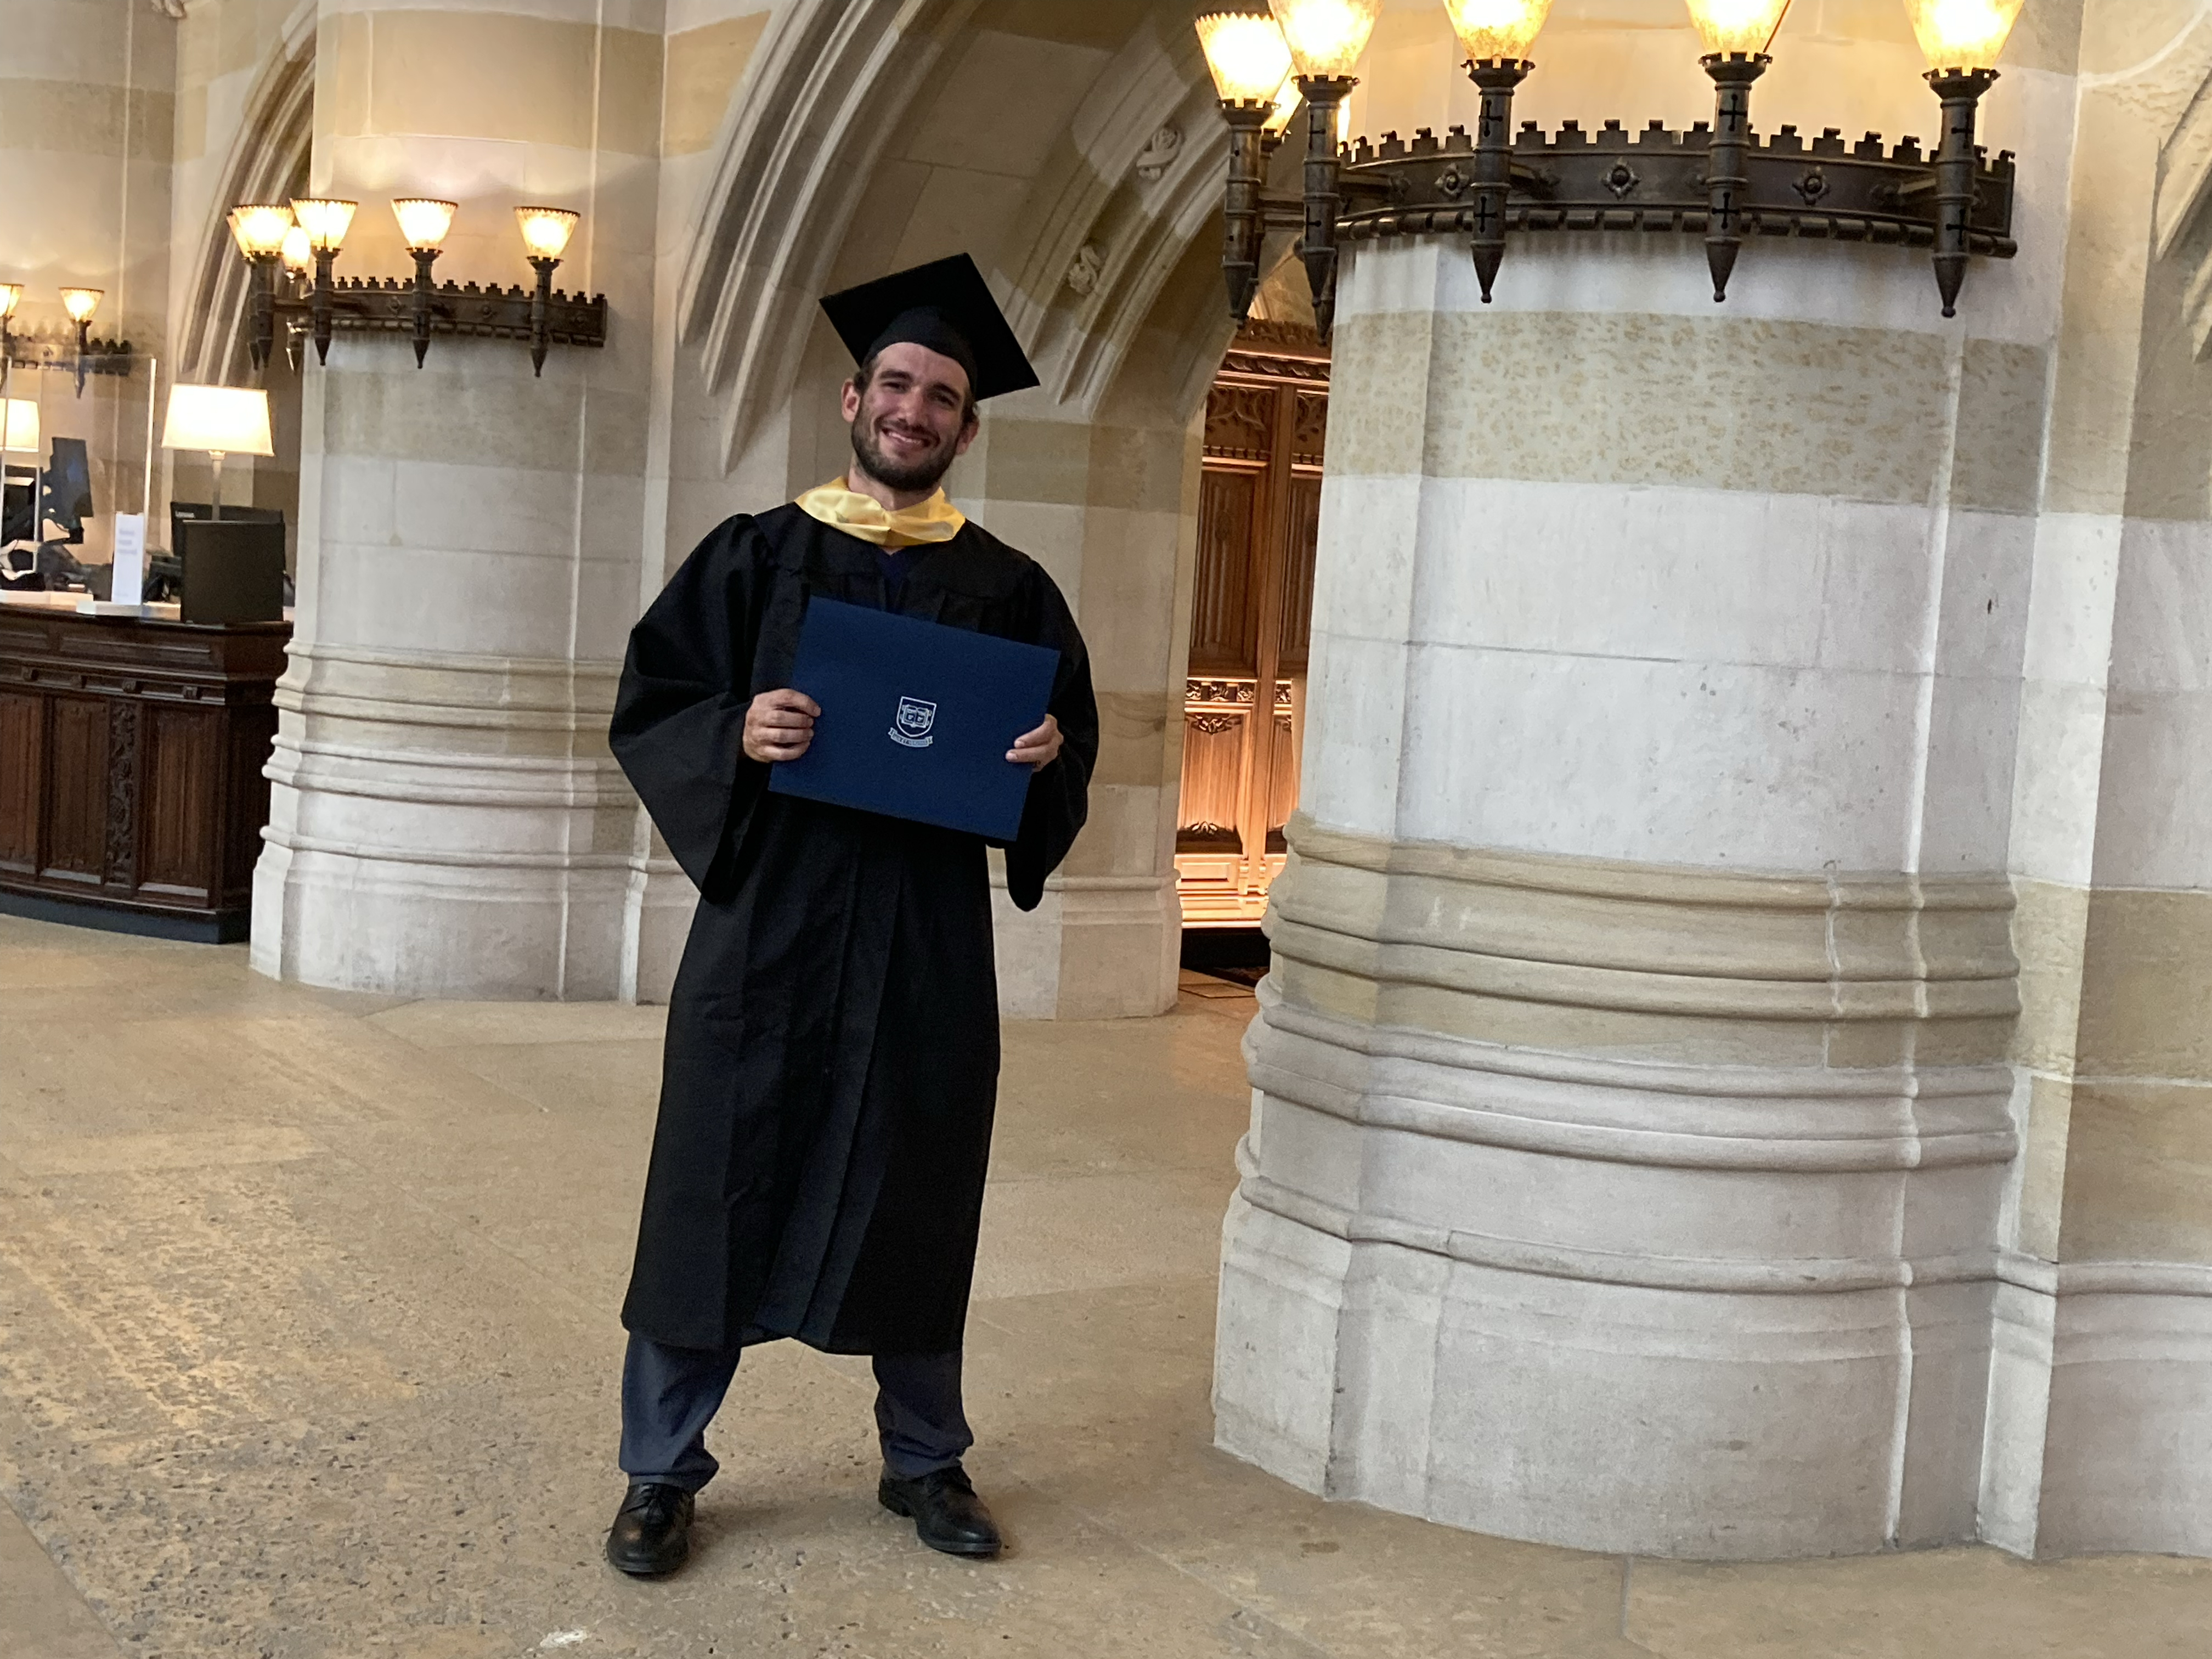 Male graduate wearing yellow stole and holding his blue diploma folder poses in Sterling Nave between pillars near the circulation desk. He has dark hair and a closely trimmed beard and mustache and a large grin.